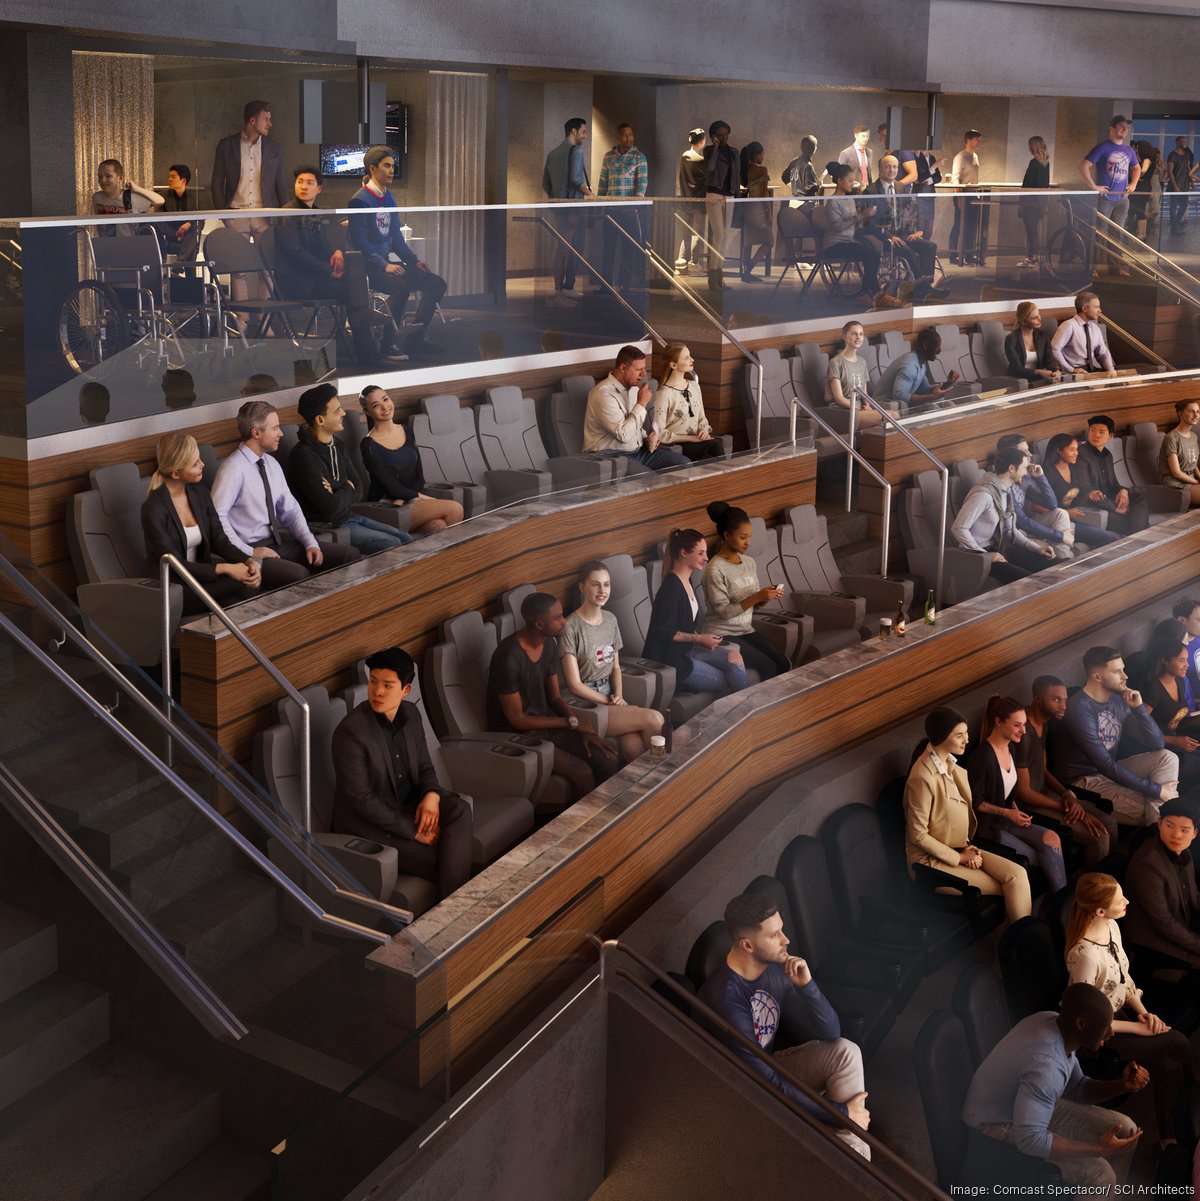 New $50M Club Level at the Wells Fargo Center will open this fall with new  restaurants, bars, retail and seating options 